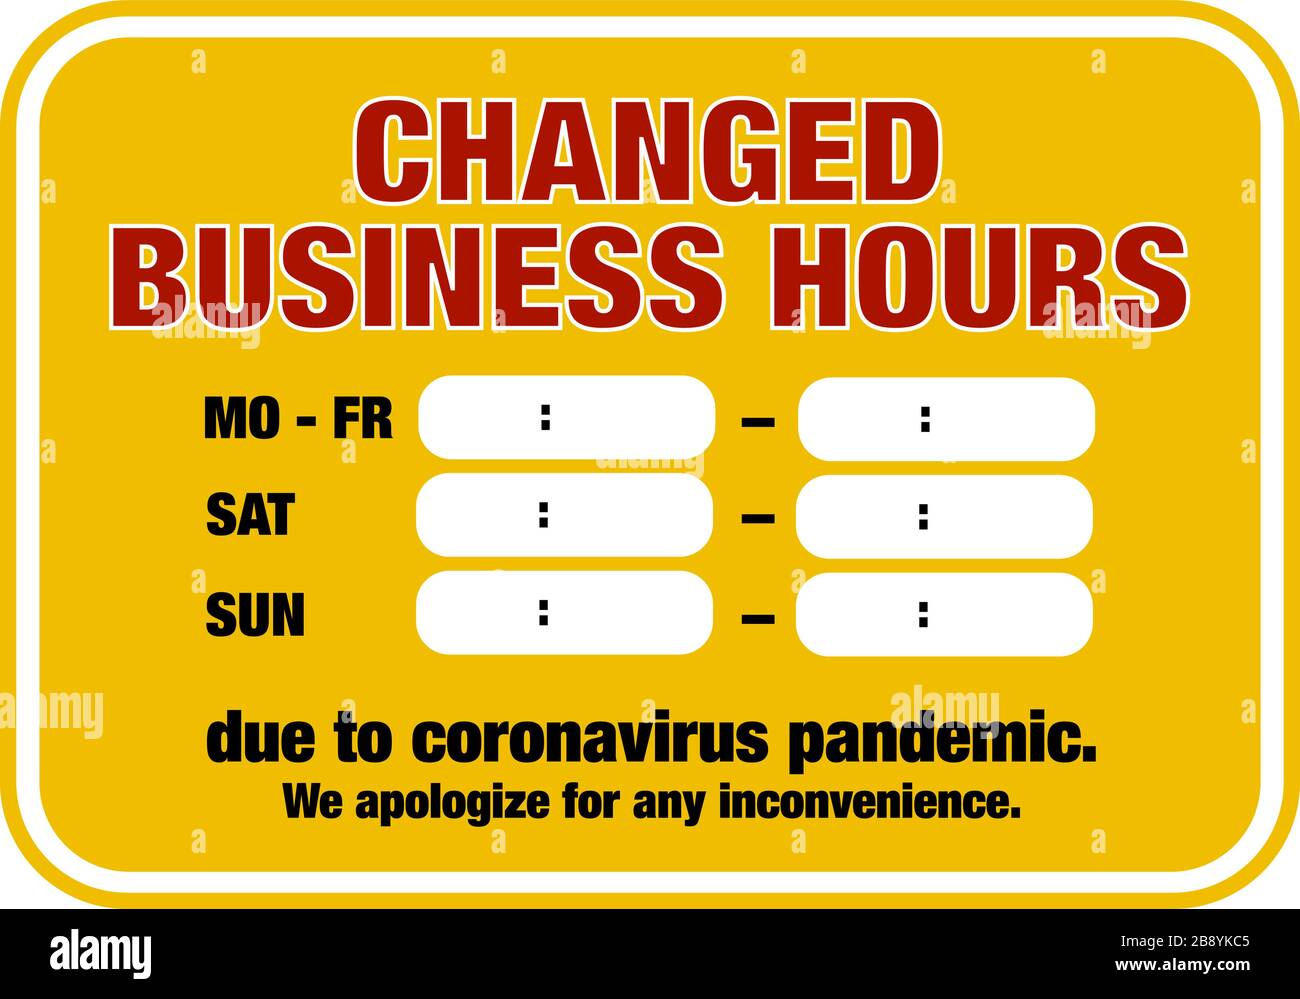 changed opening hours sign template with text CHANGED BUSINESS HOURS DUE TO CORONAVIRUS PANDEMIC with space for times Stock Vector